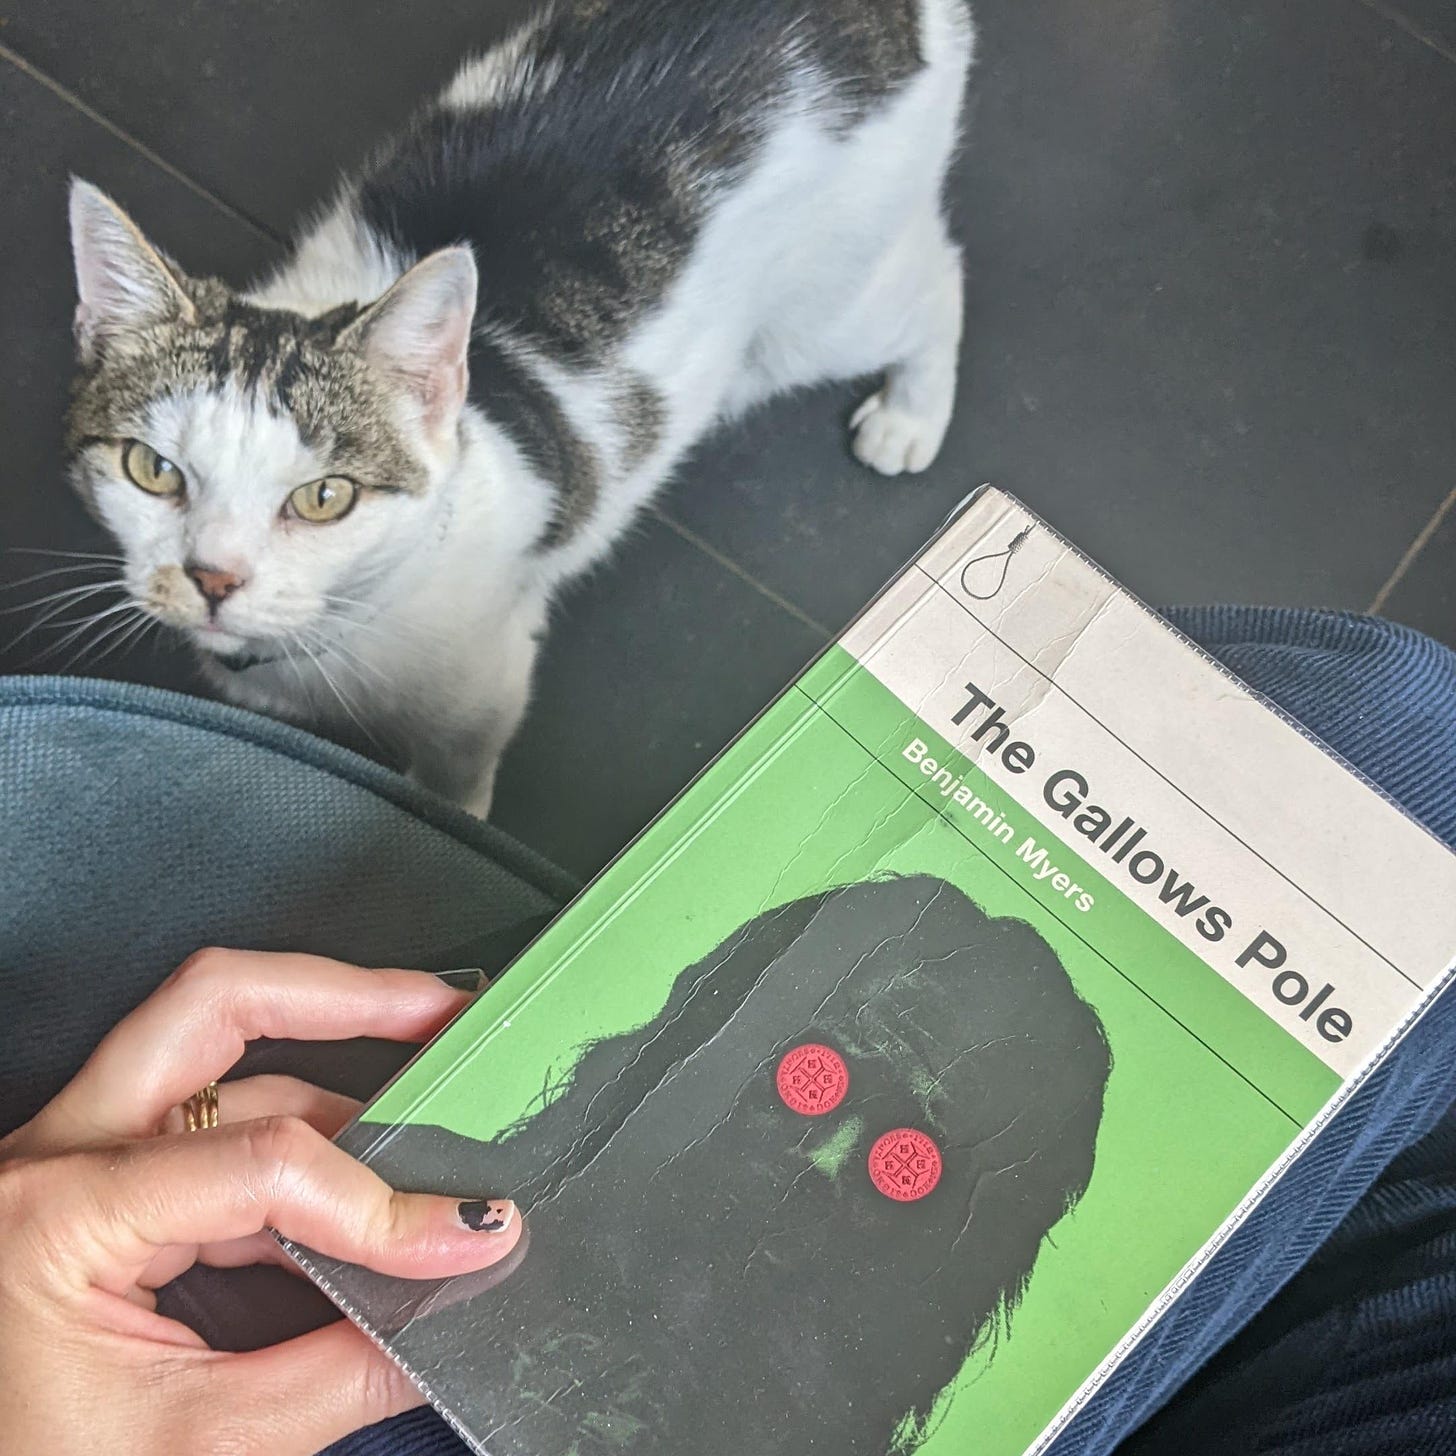 A white and tabby cat looks to camera. In the foreground is a copy of The Gallows Pole by Benjamin Myers looking all creepy.